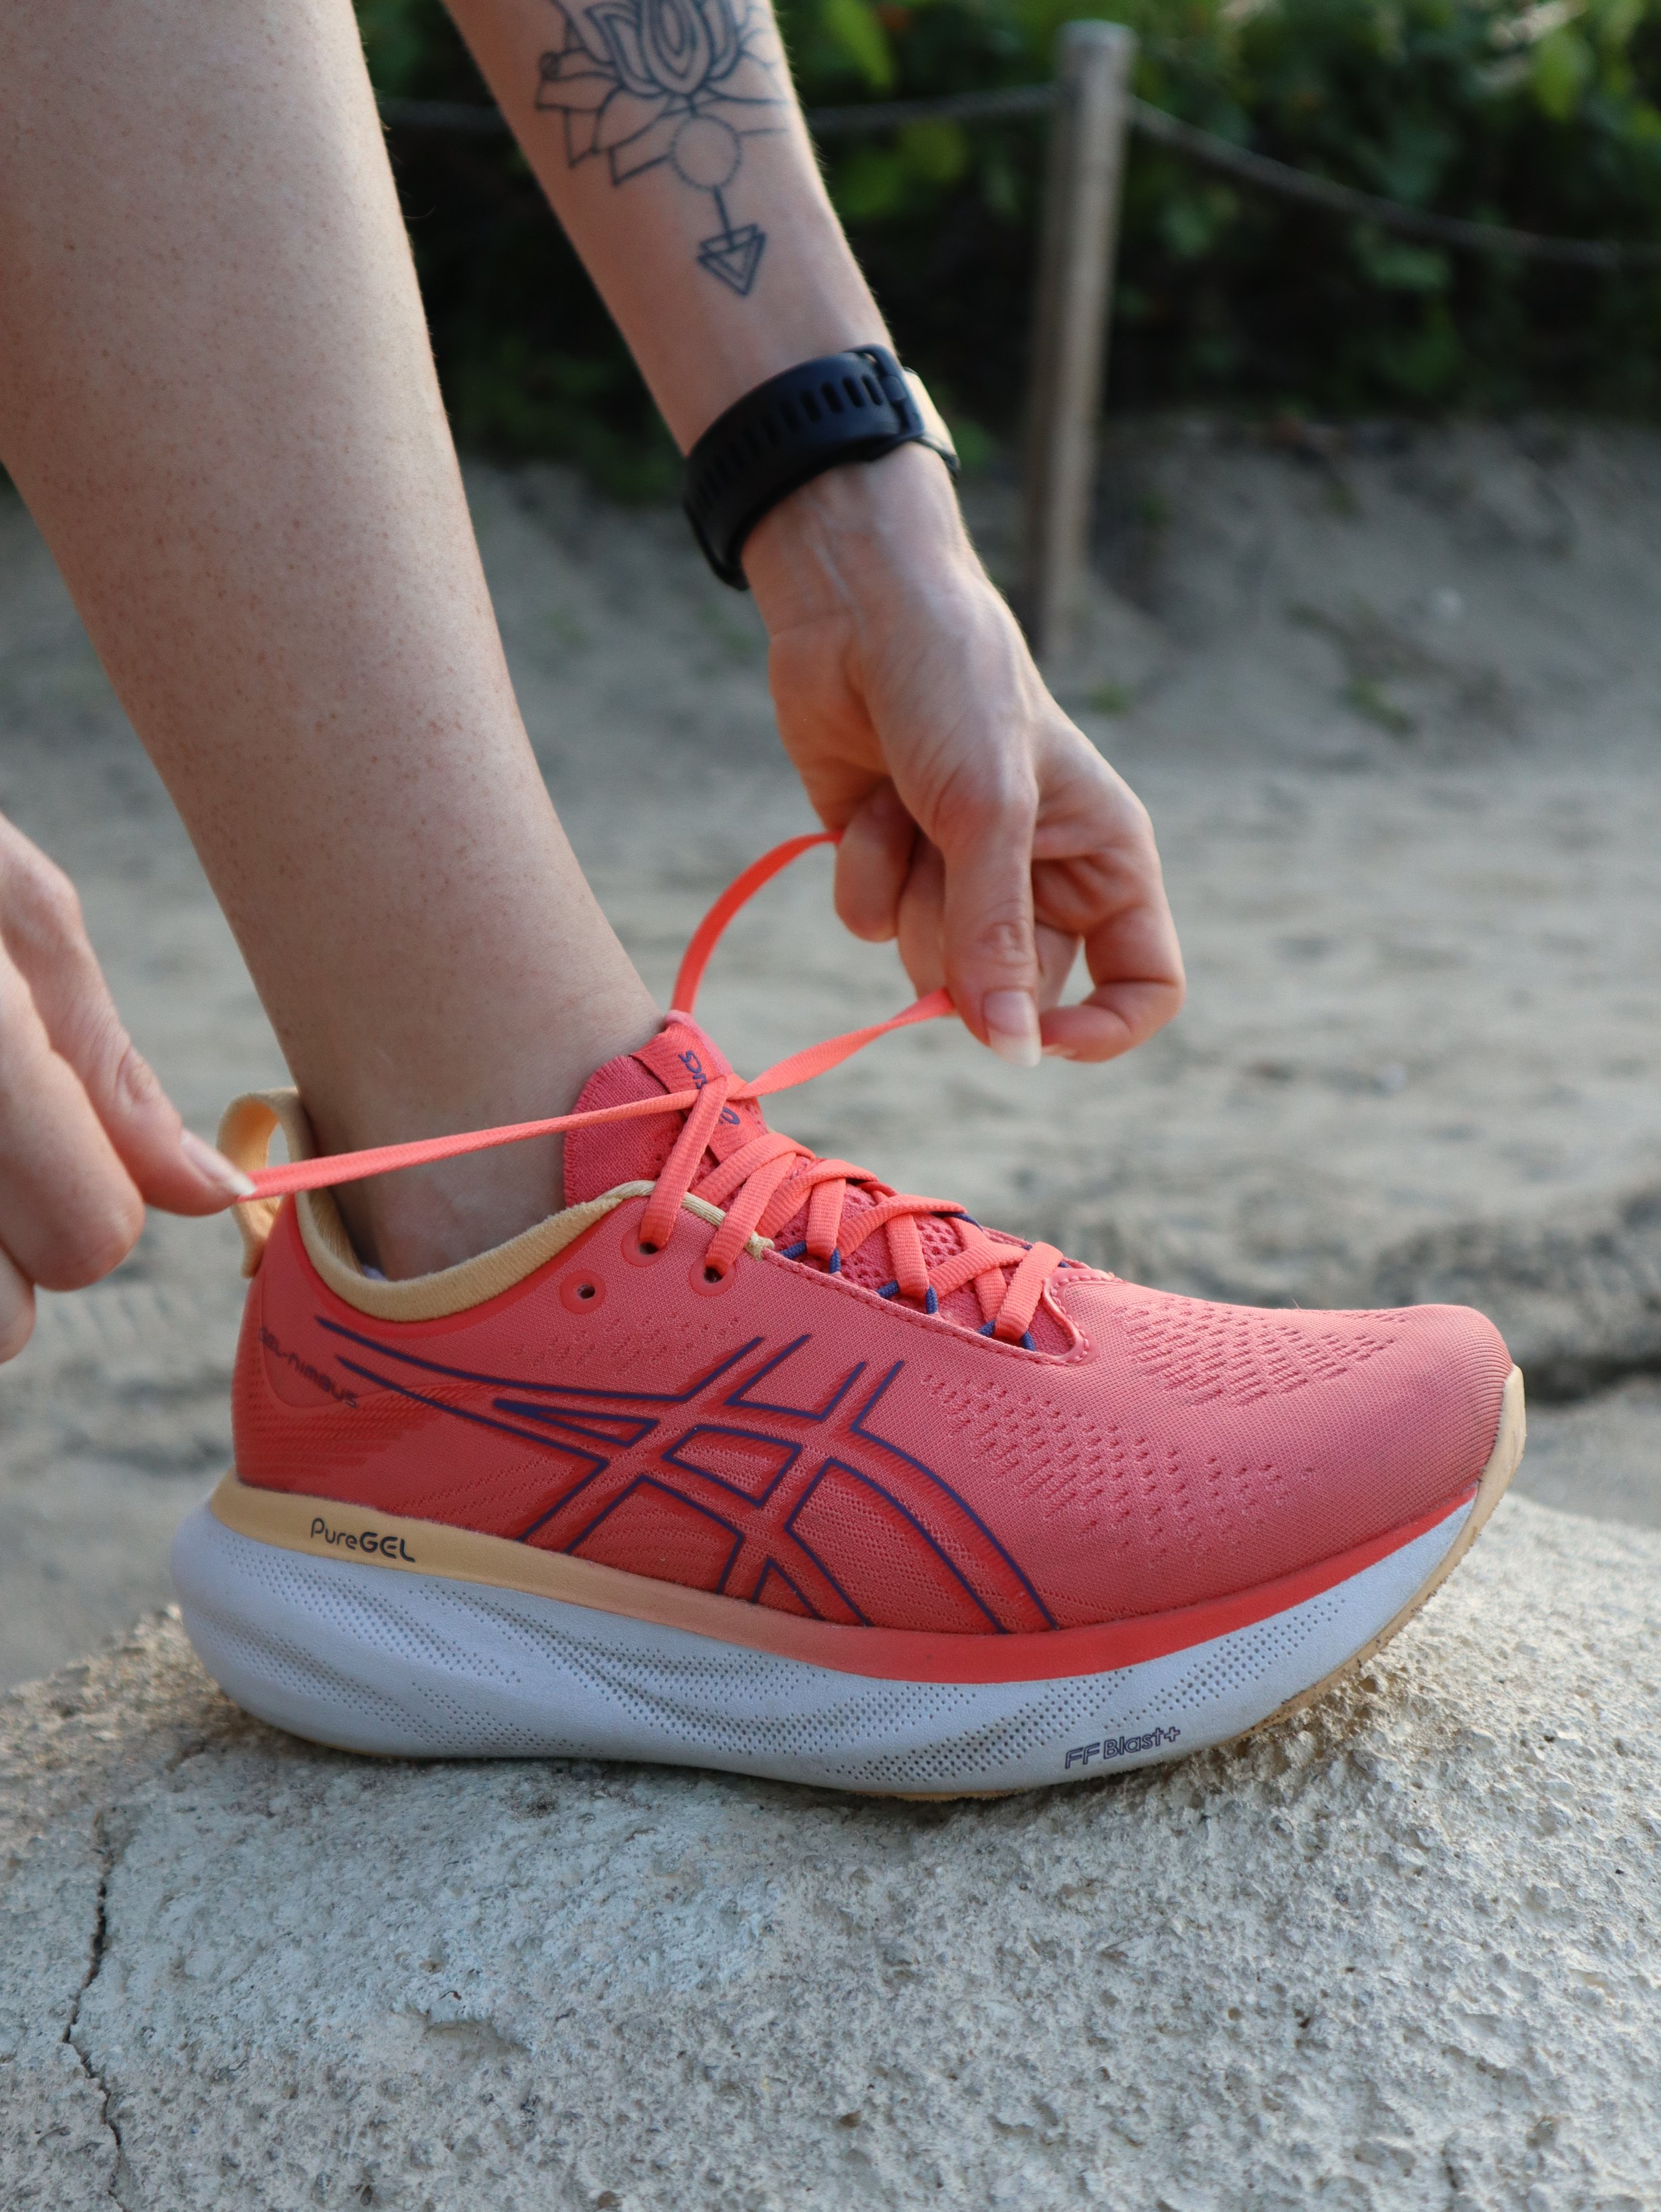 conocido cera Marquesina ASICS GEL-NIMBUS 25 review | Better than the Nike Invincible 3?